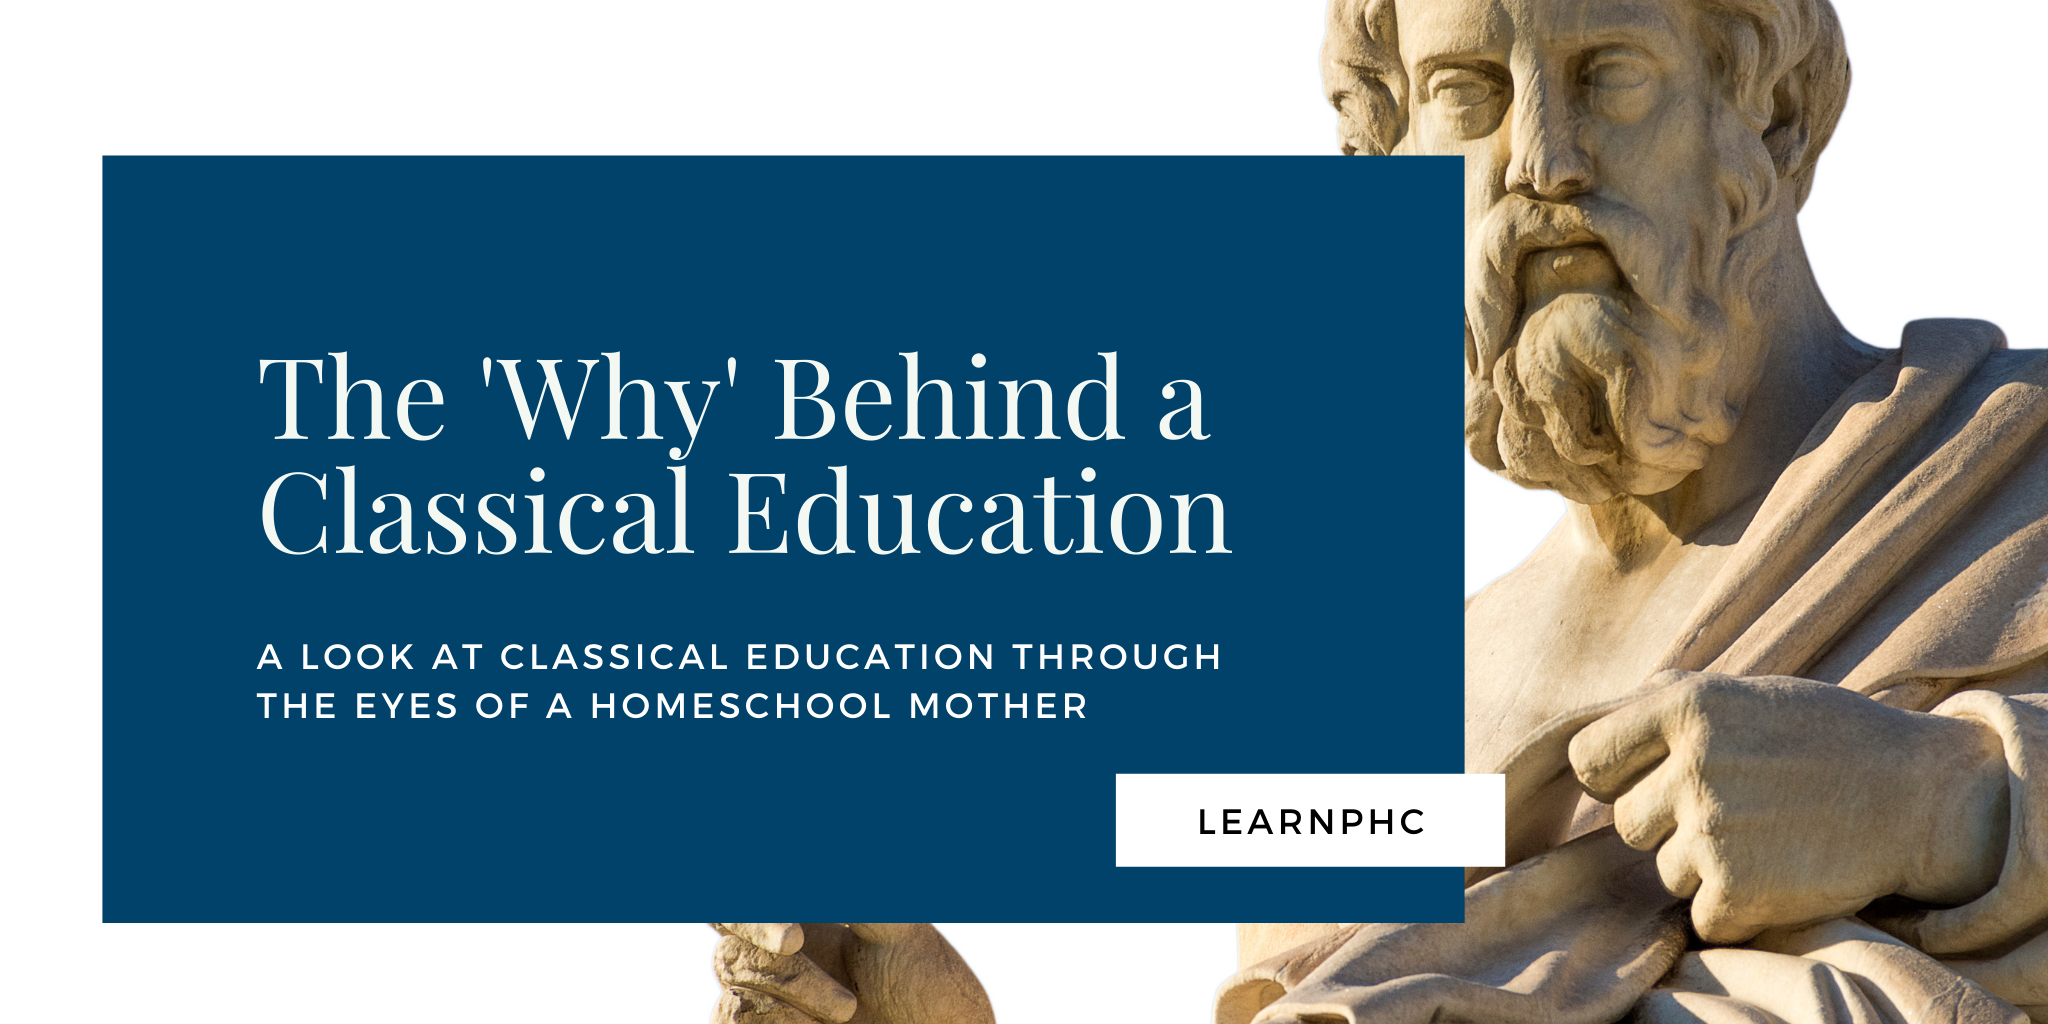 A Look at Classical Education Through the Eyes of a Homeschool Mother